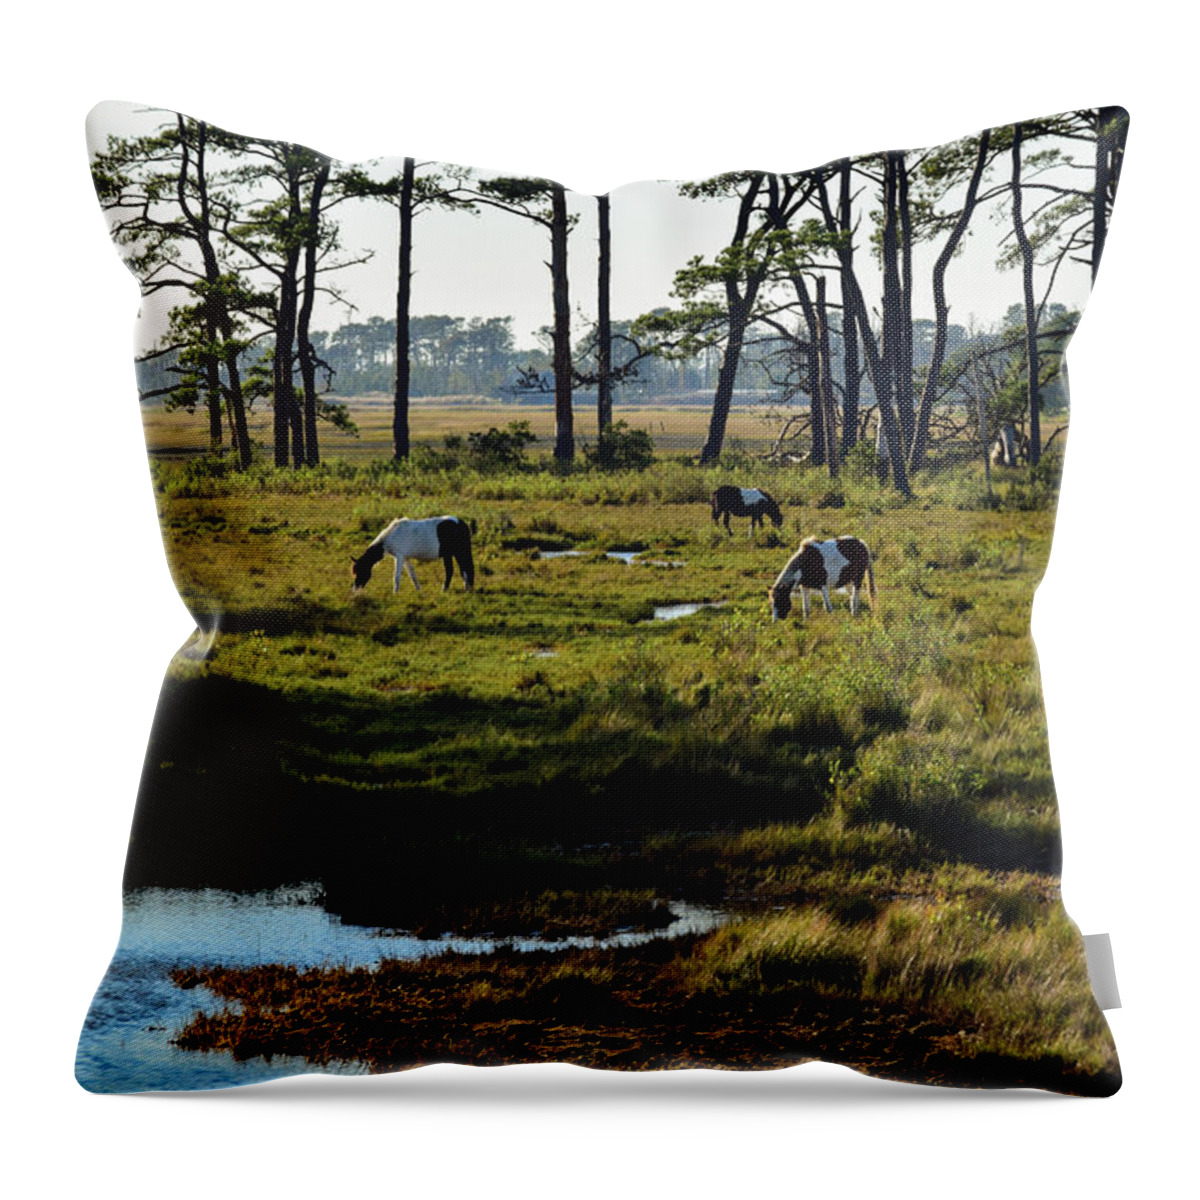 Chincoteague Throw Pillow featuring the photograph Chincoteague Ponies by Nicole Lloyd